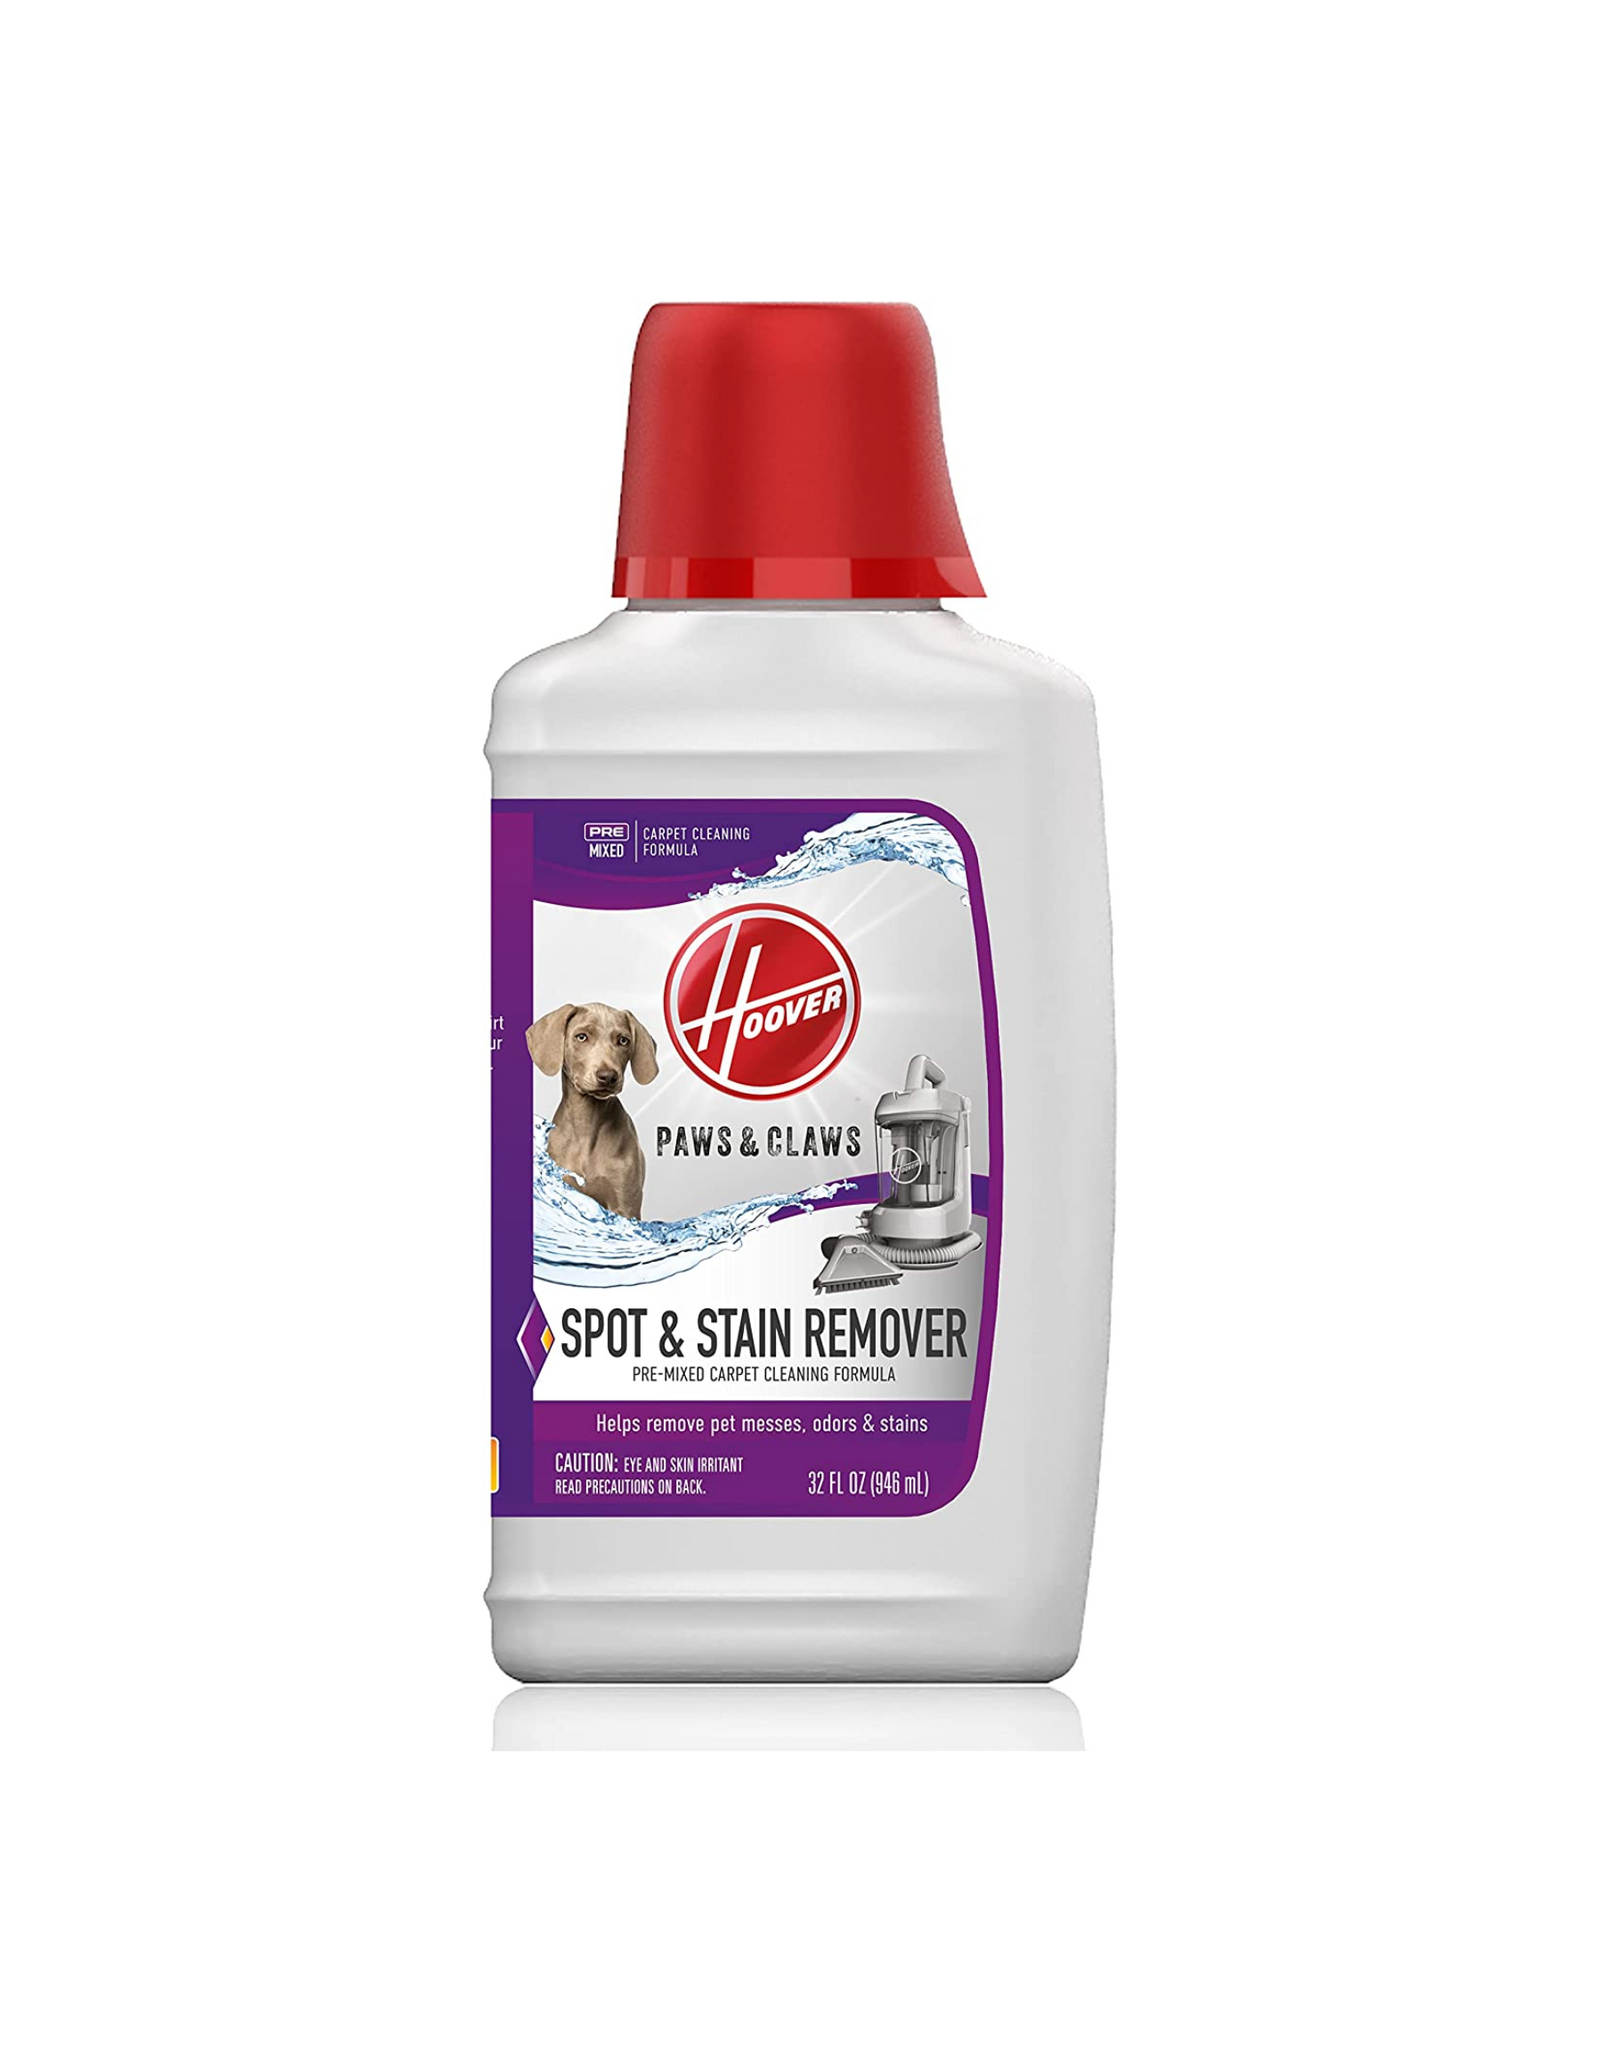 Hoover Carpet Paws & Claws Premixed Spot Stain Remover AH30940, 32 fl oz, White